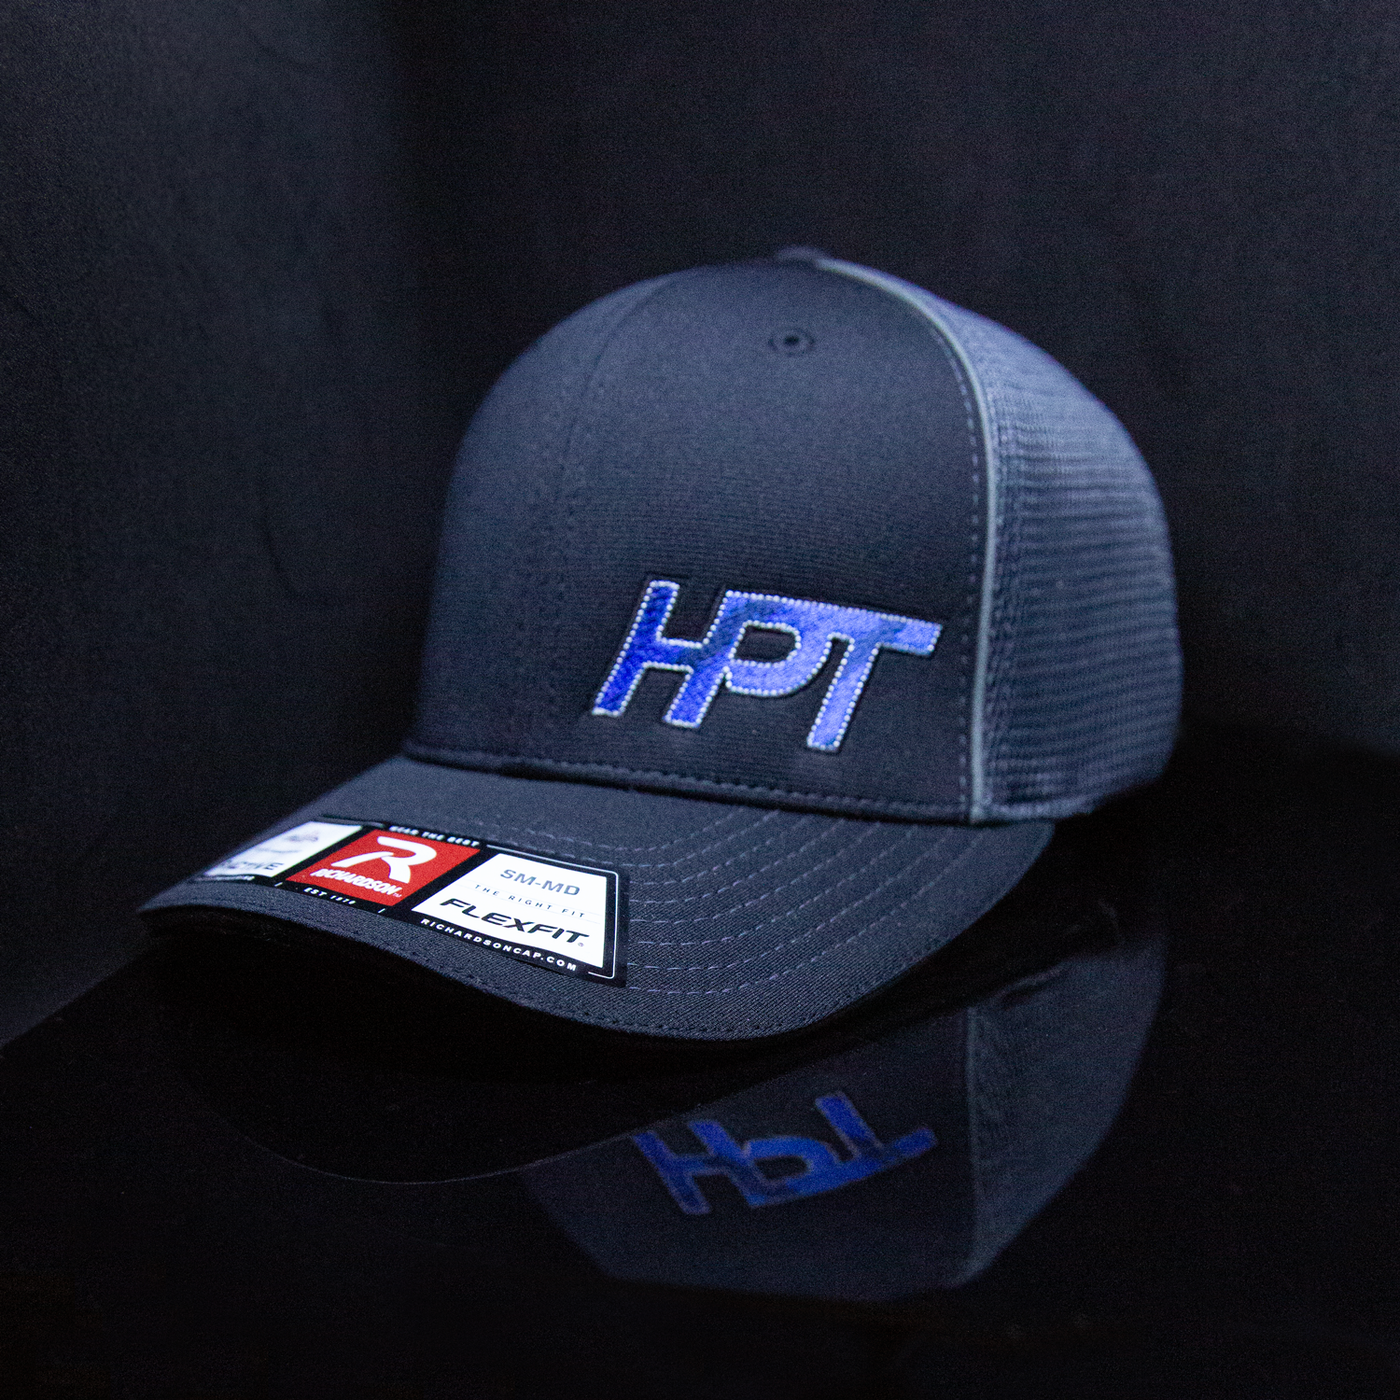 Black/Gray Mesh Fitted Hat